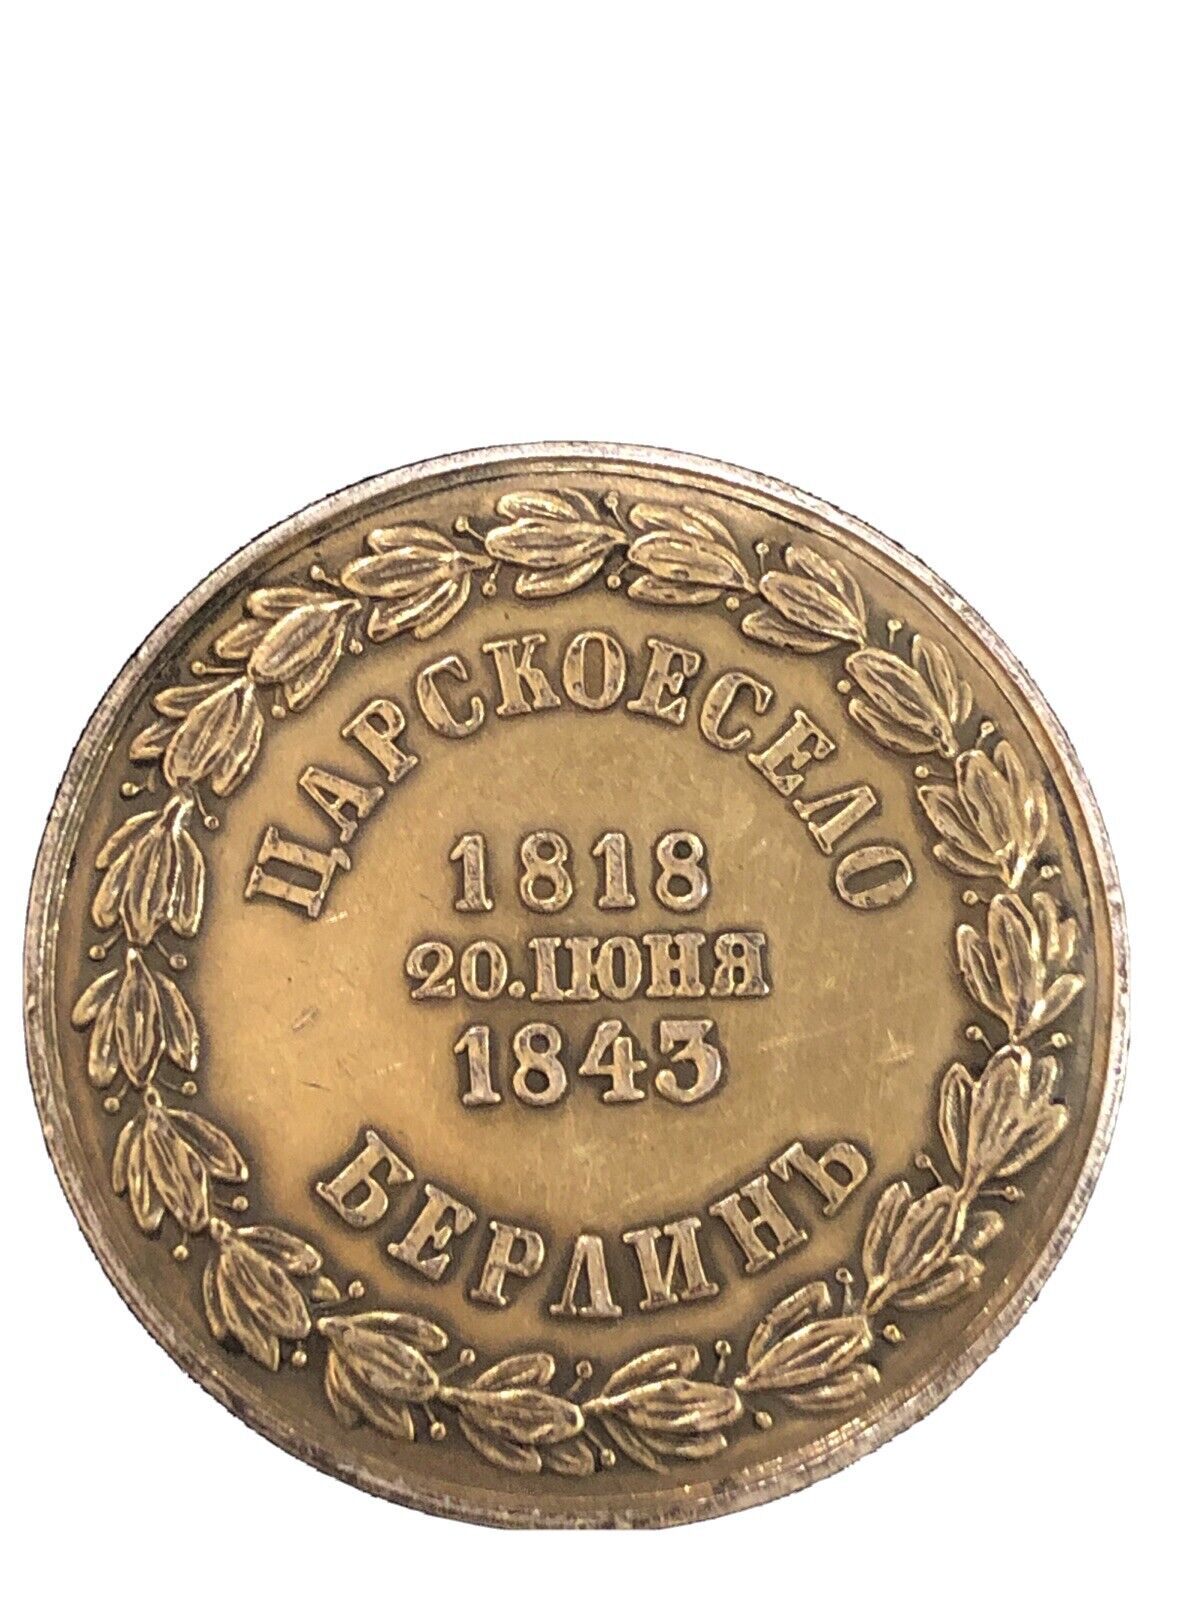 RUSSIA/PRUSSIA COMMEMORATIVE SILVER MEDAL OF 3rd GRENADIERS PERNOVSKY REGIMENT.